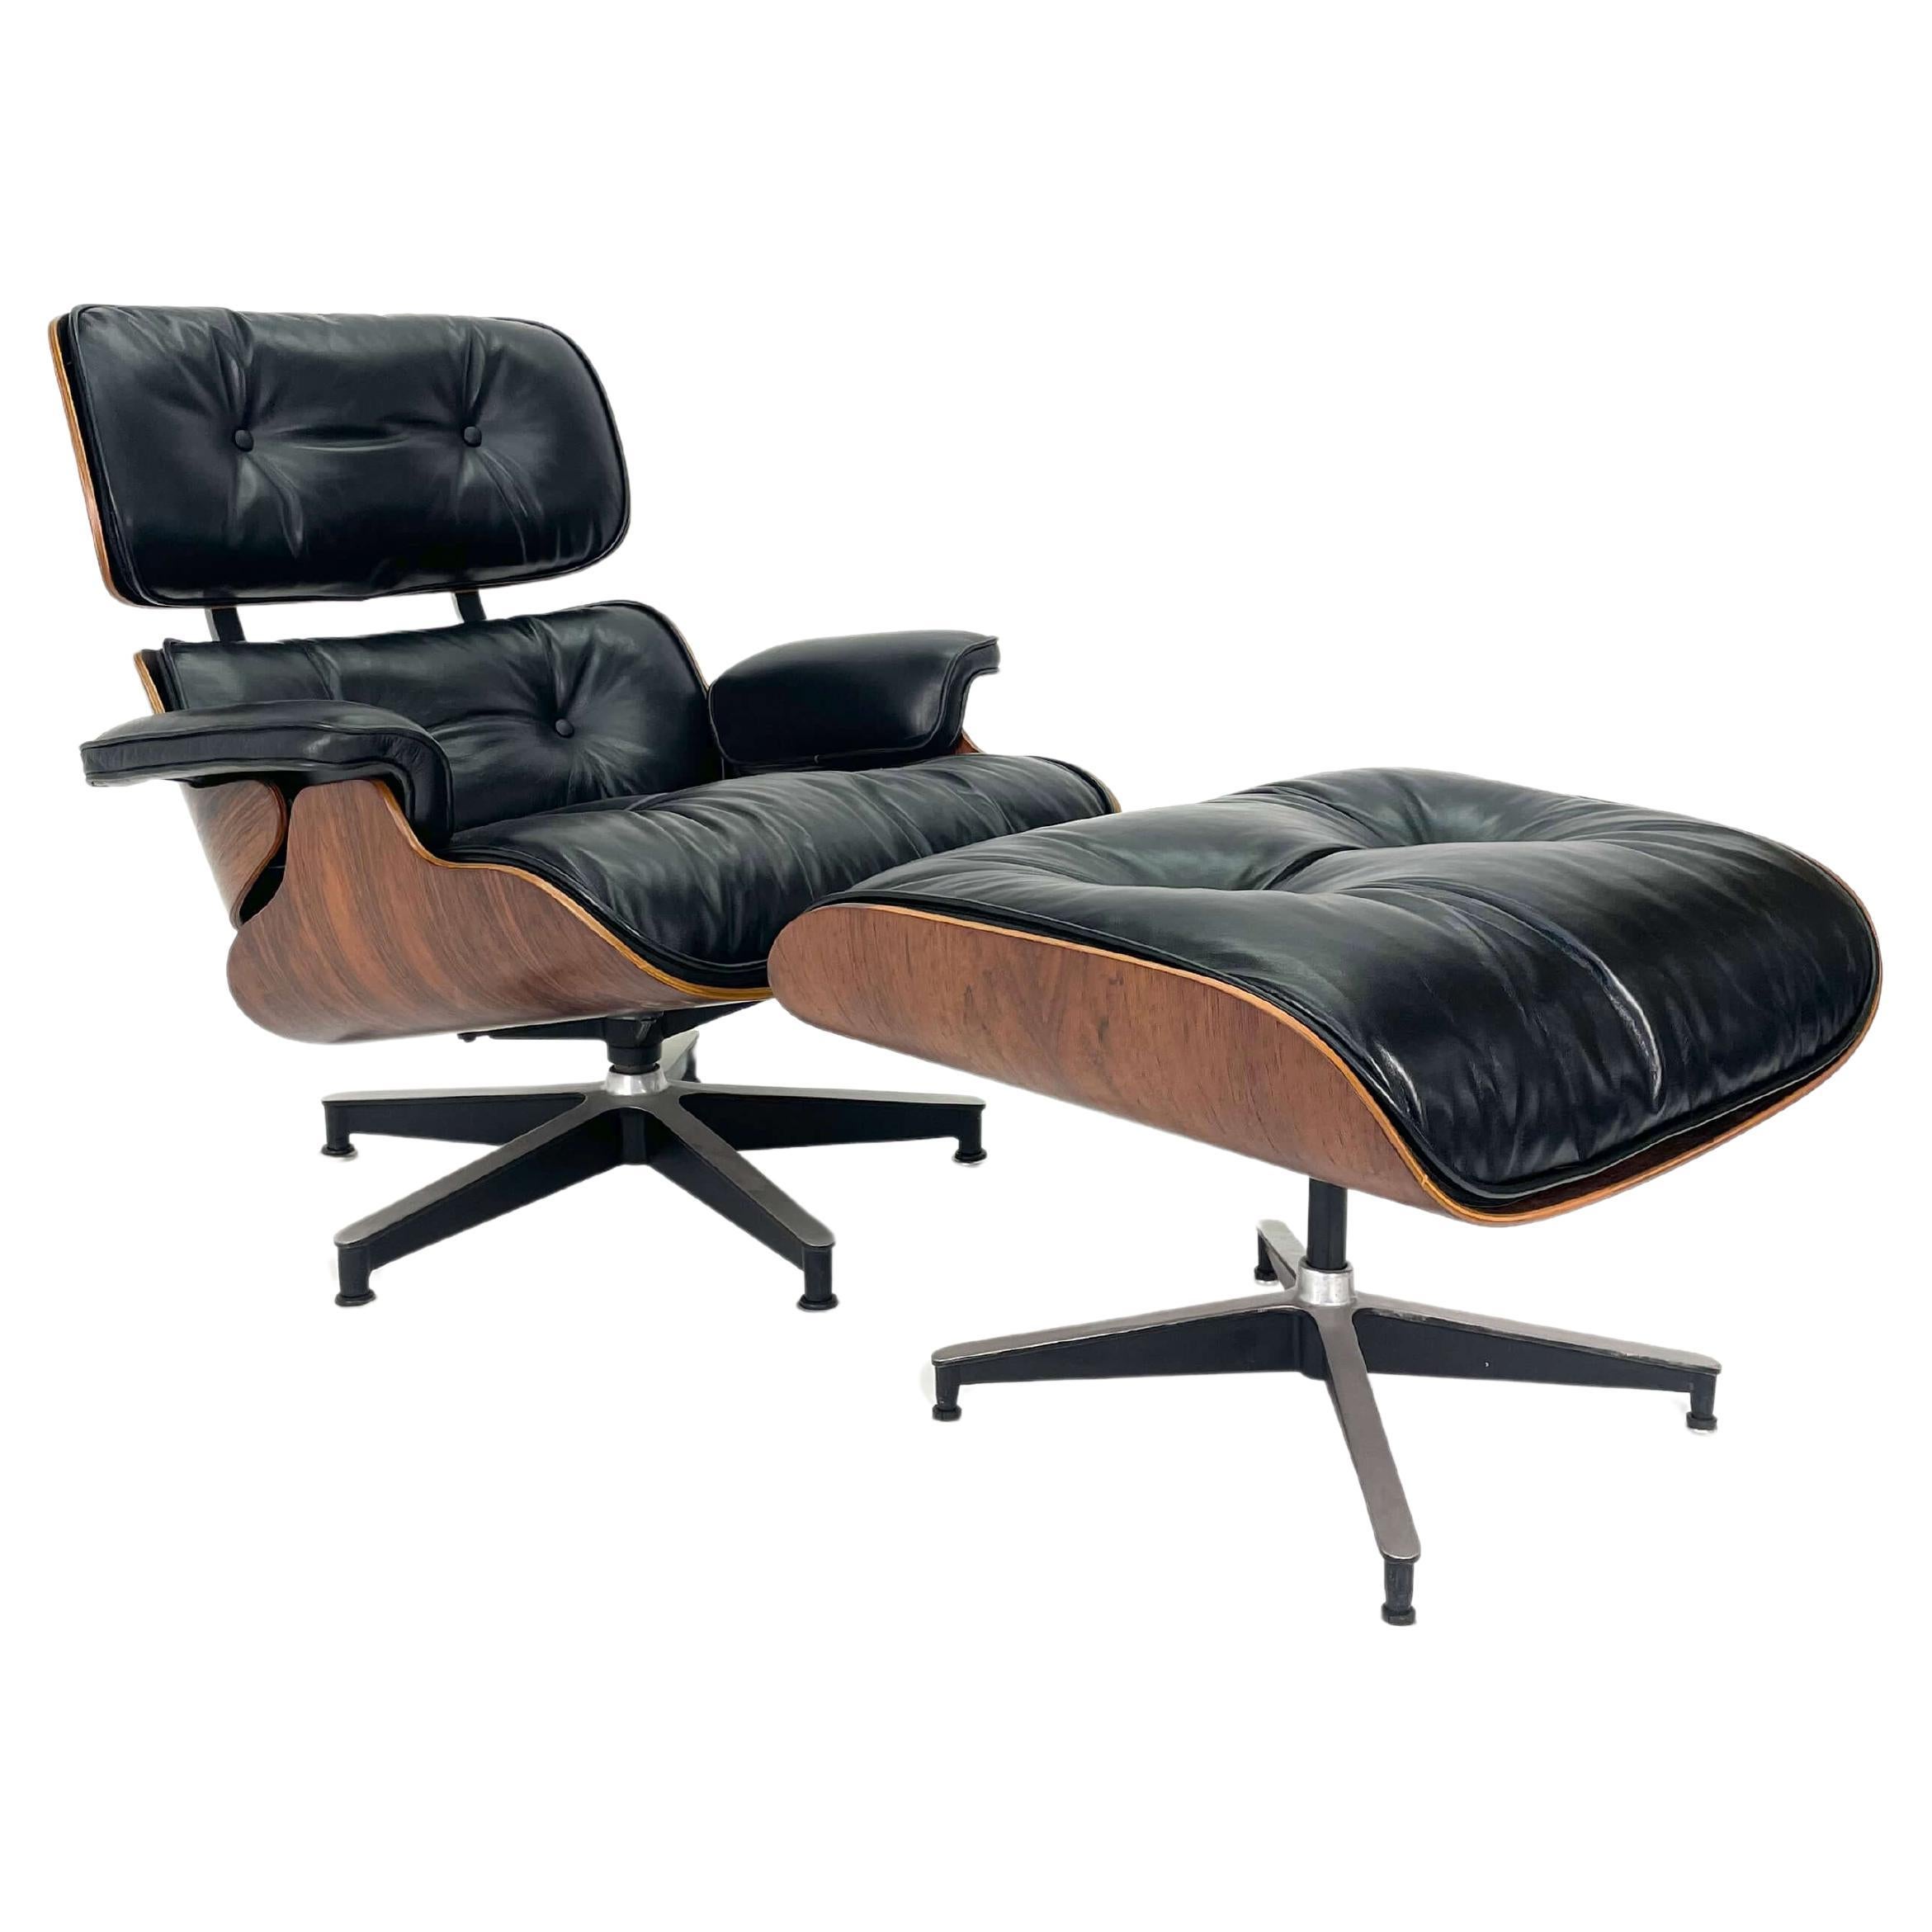 2nd Generation Eames Lounge Chair and Ottoman in Rosewood, Circa 1960's